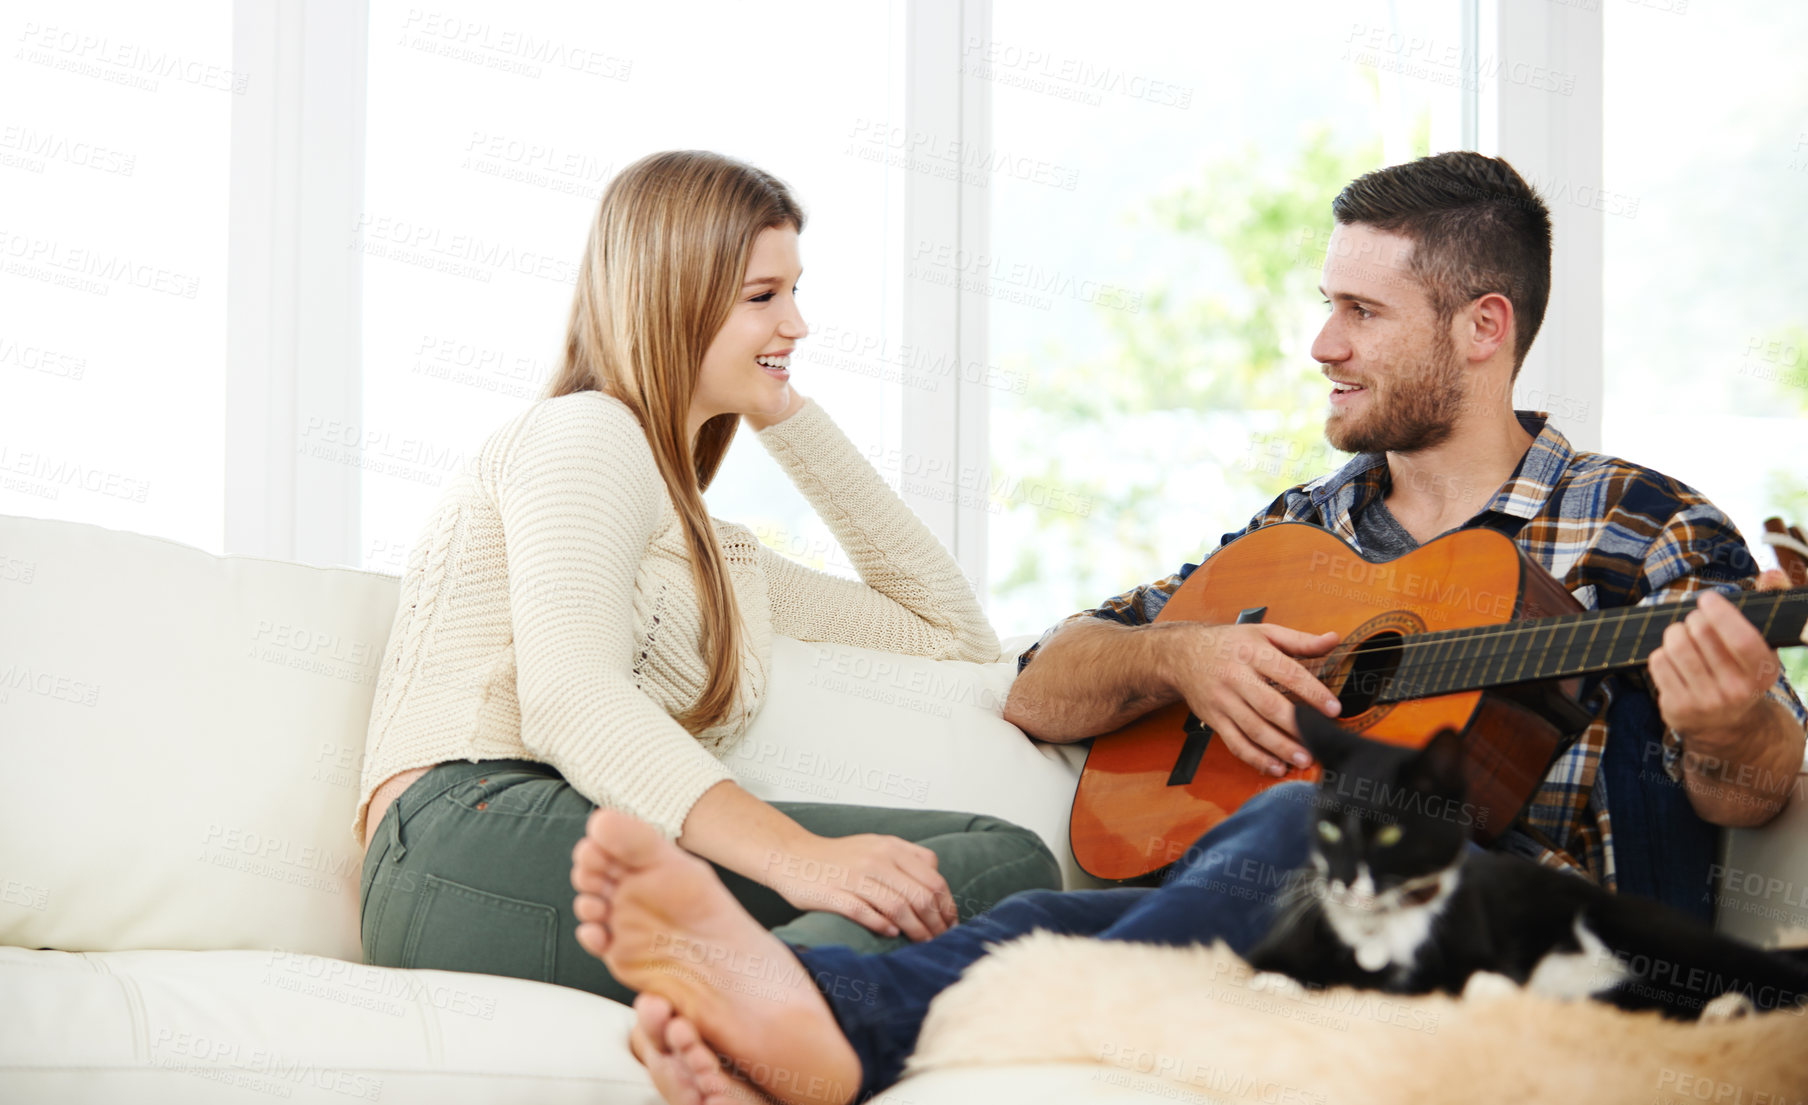 Buy stock photo Shot of a young man playing the guitar for his girlfriend while sitting on their sofa